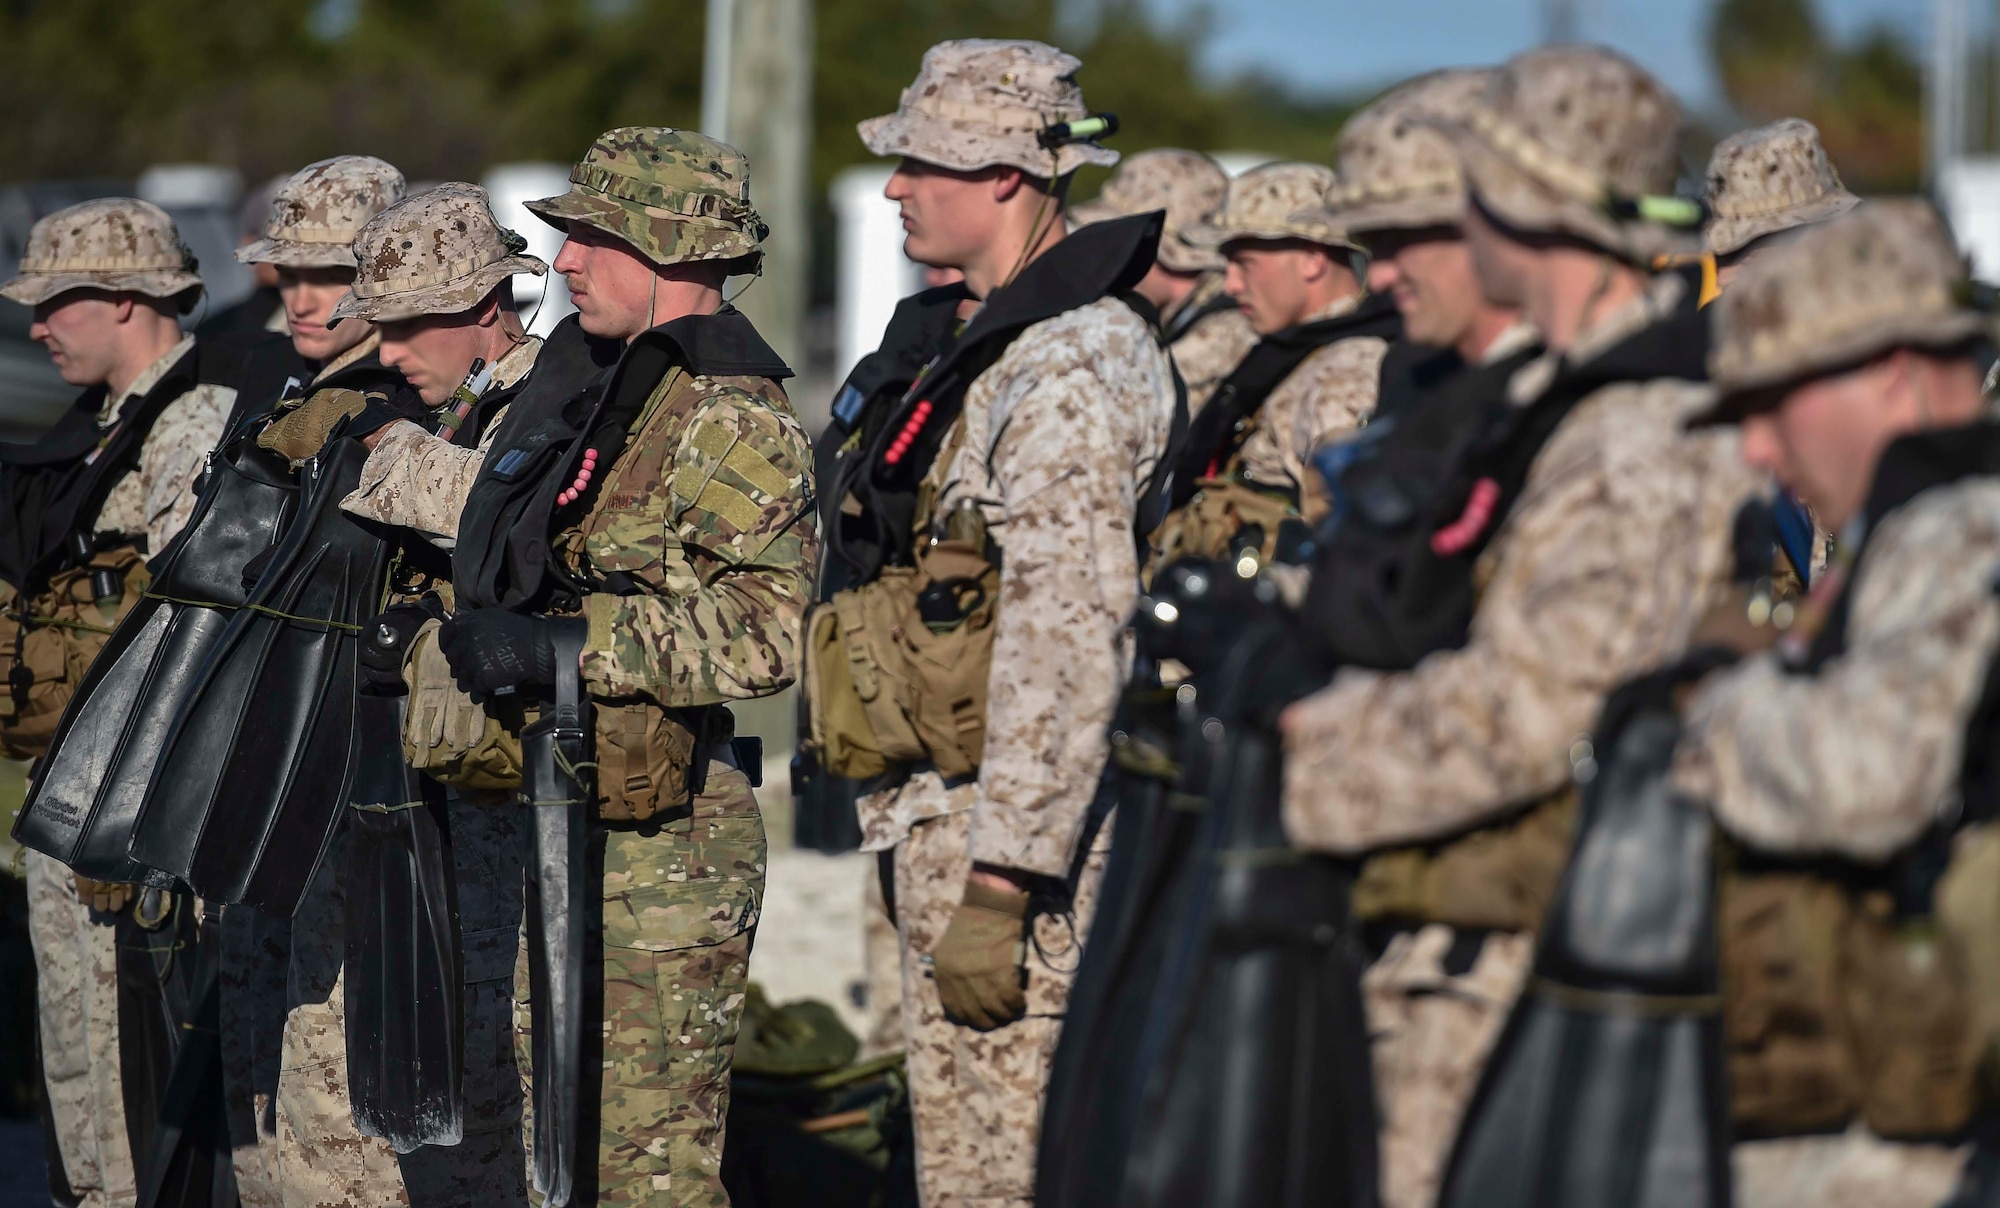 U.S. Marines and Airmen line up for a fin inspection during the Marine Special Operations School’s Individual Training Course, March 20, 2017 at Key West, Fla. For the first time, U.S. Air Force Special Tactics Airmen spent three months in Marine Special Operations Command’s Marine Raider training pipeline, representing efforts to build joint mindsets across special operations forces. (U.S. Air Force photo by Senior Airman Ryan Conroy)